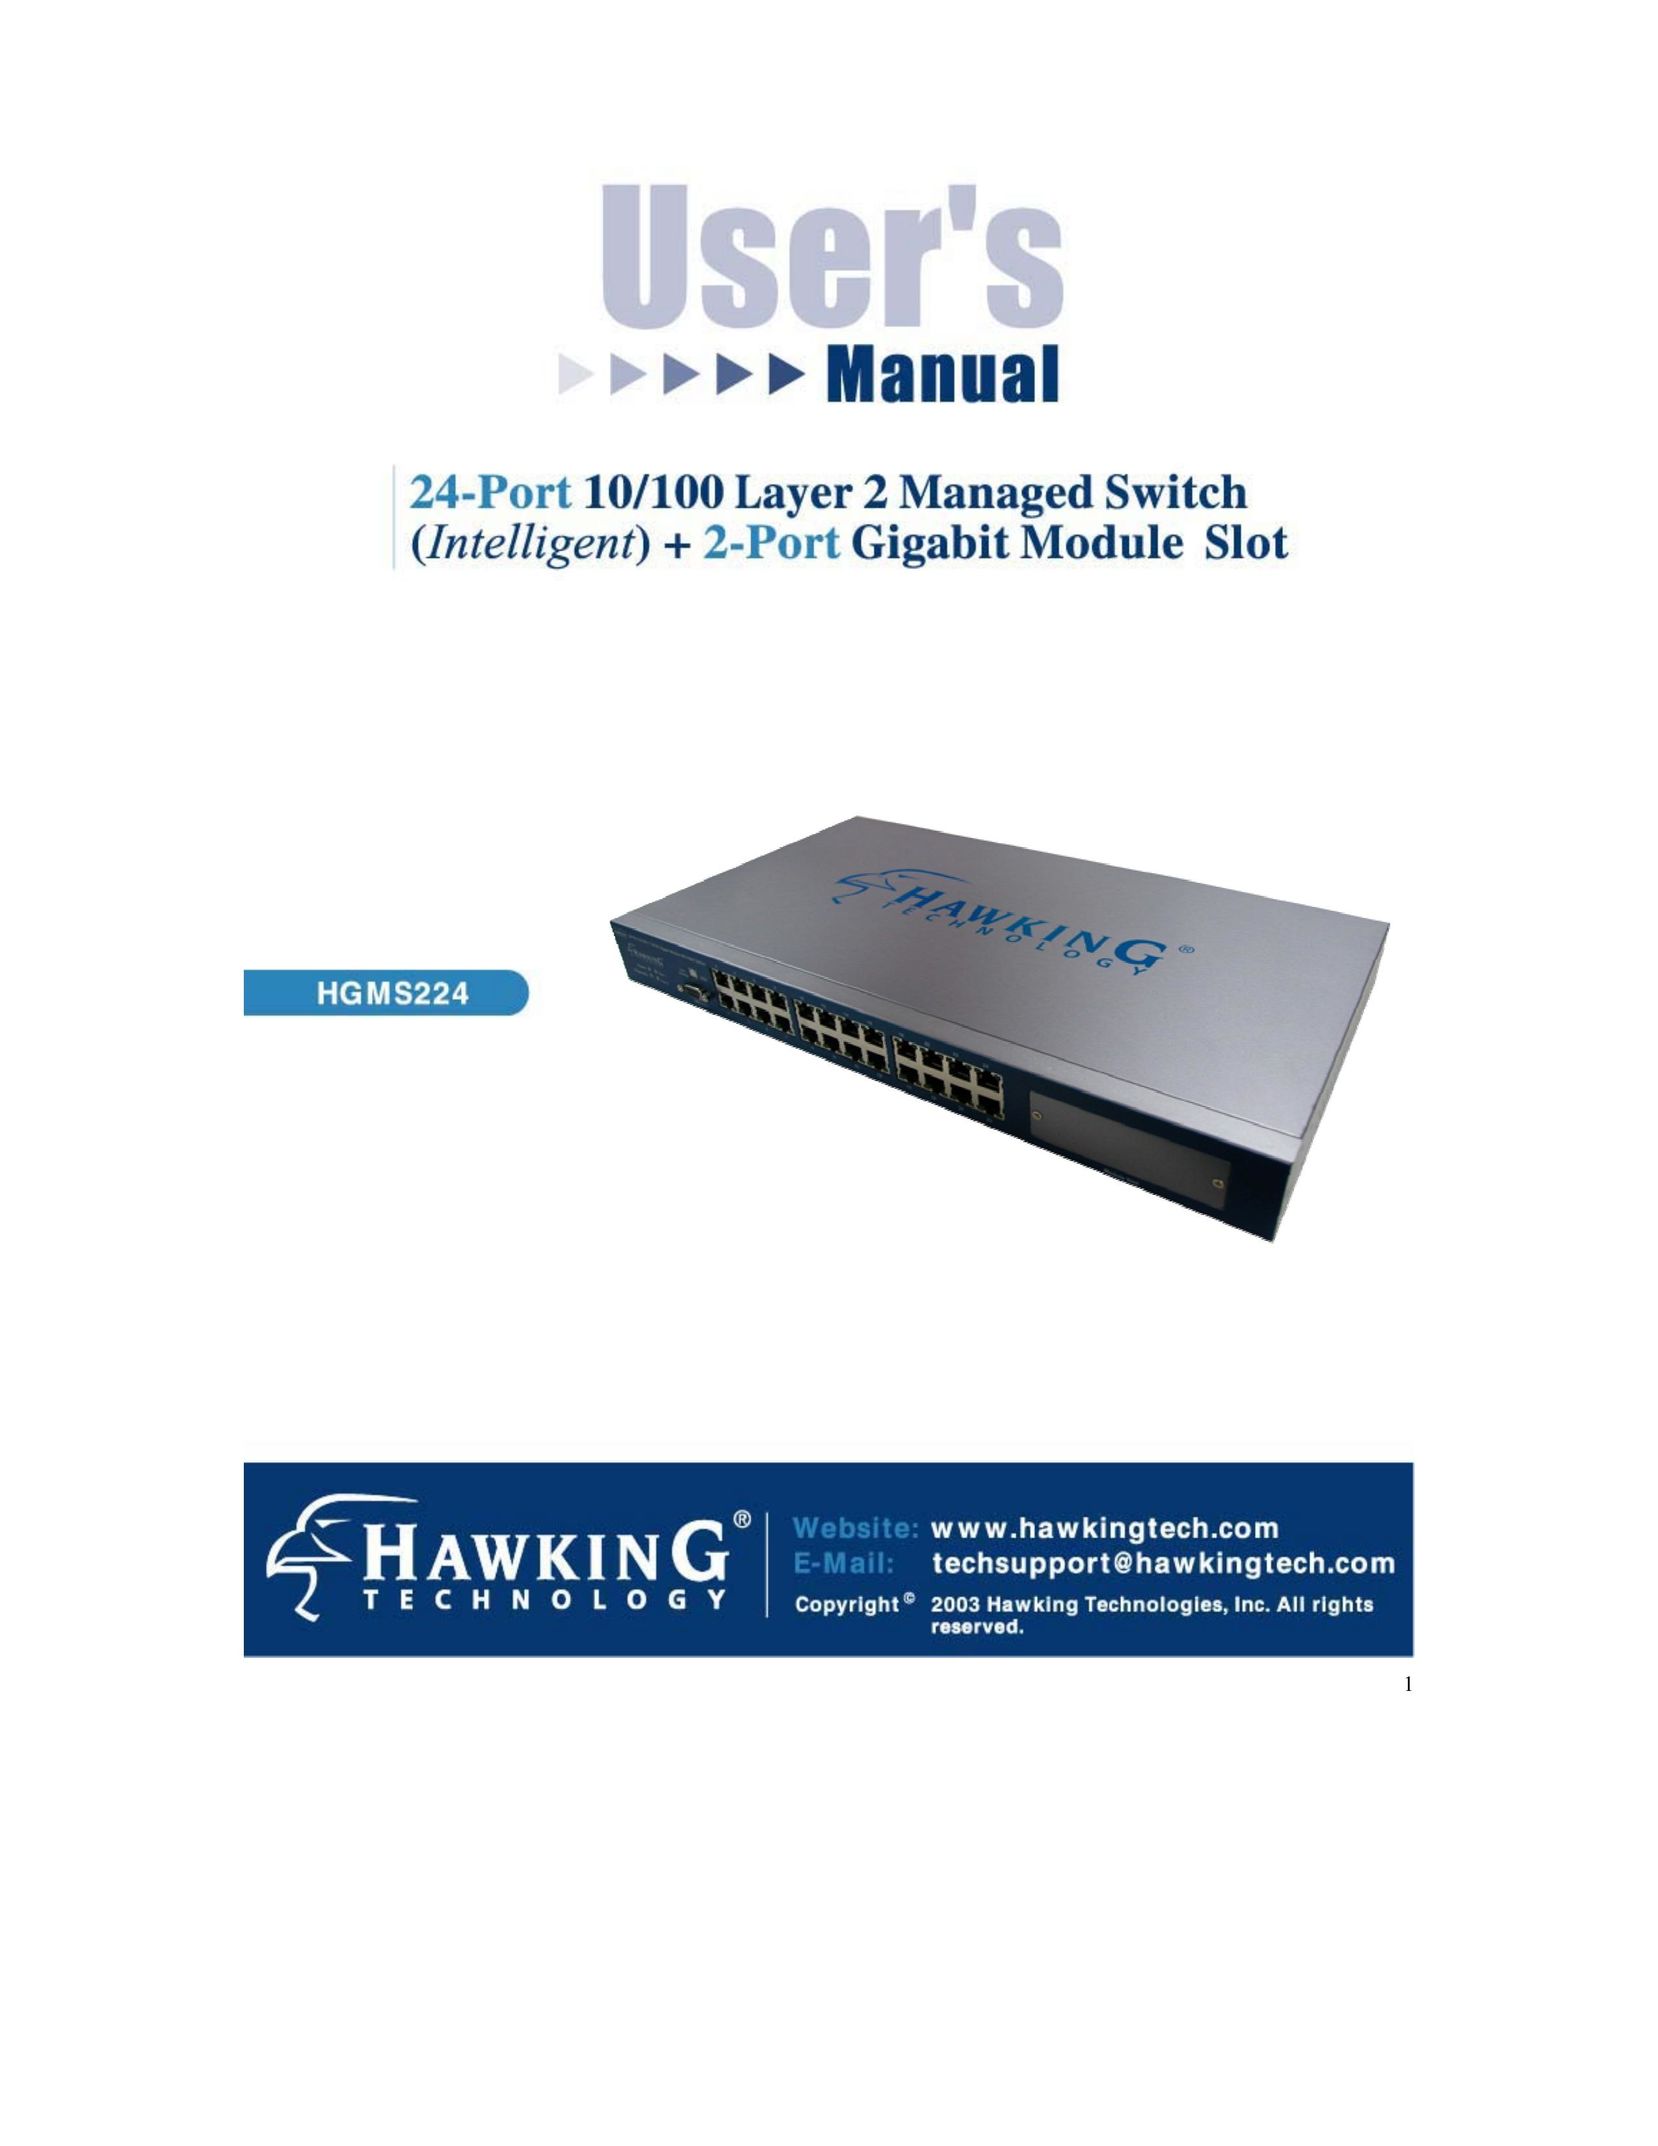 Hawking Technology HGMS224 Switch User Manual